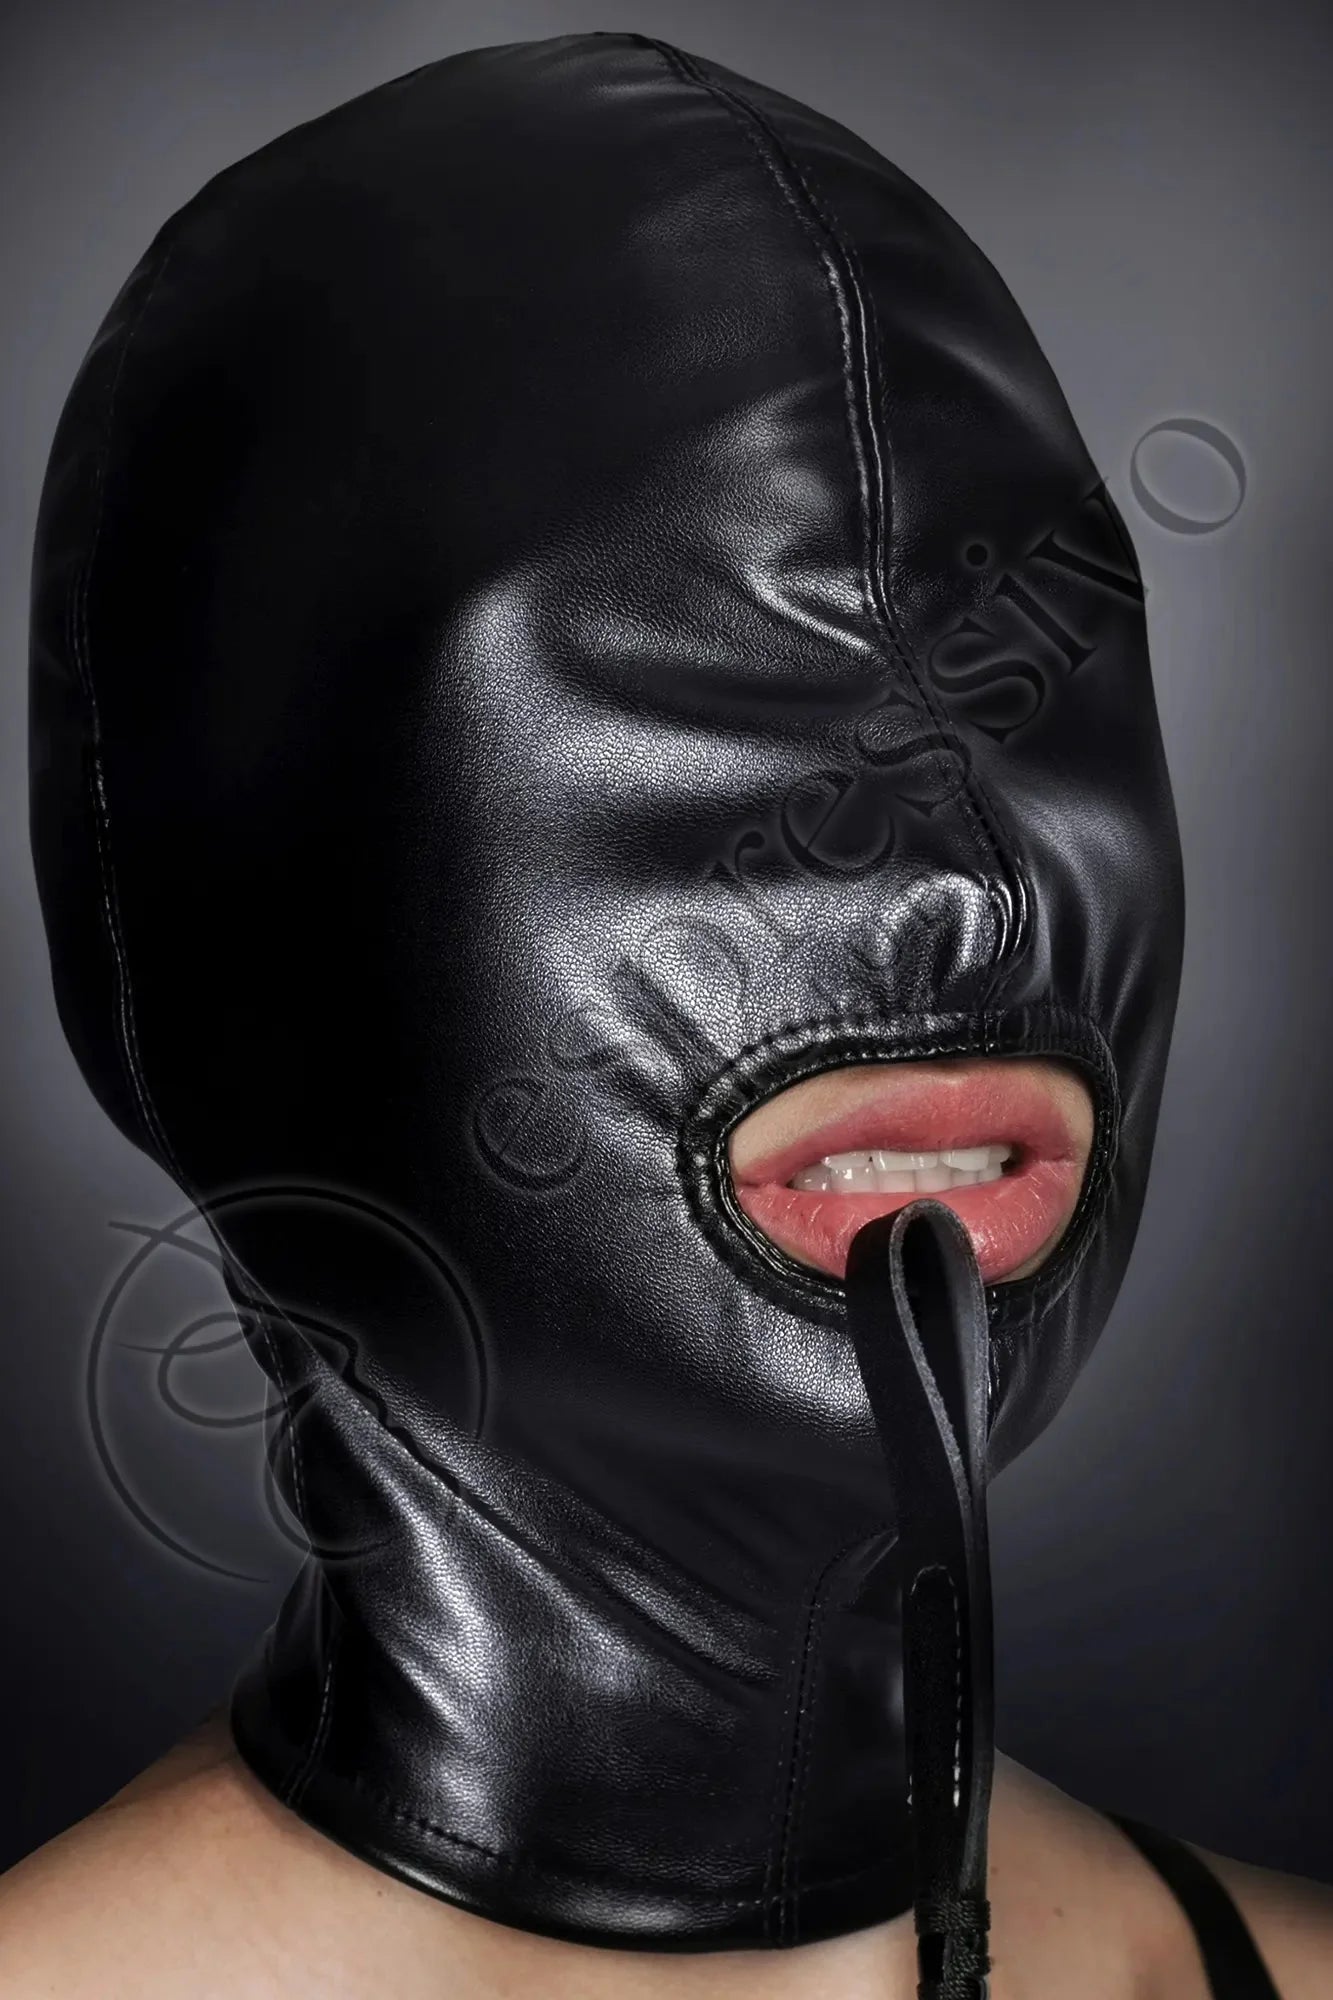 Open Mouth Cocksucker Hood for Extreme Bondage image picture